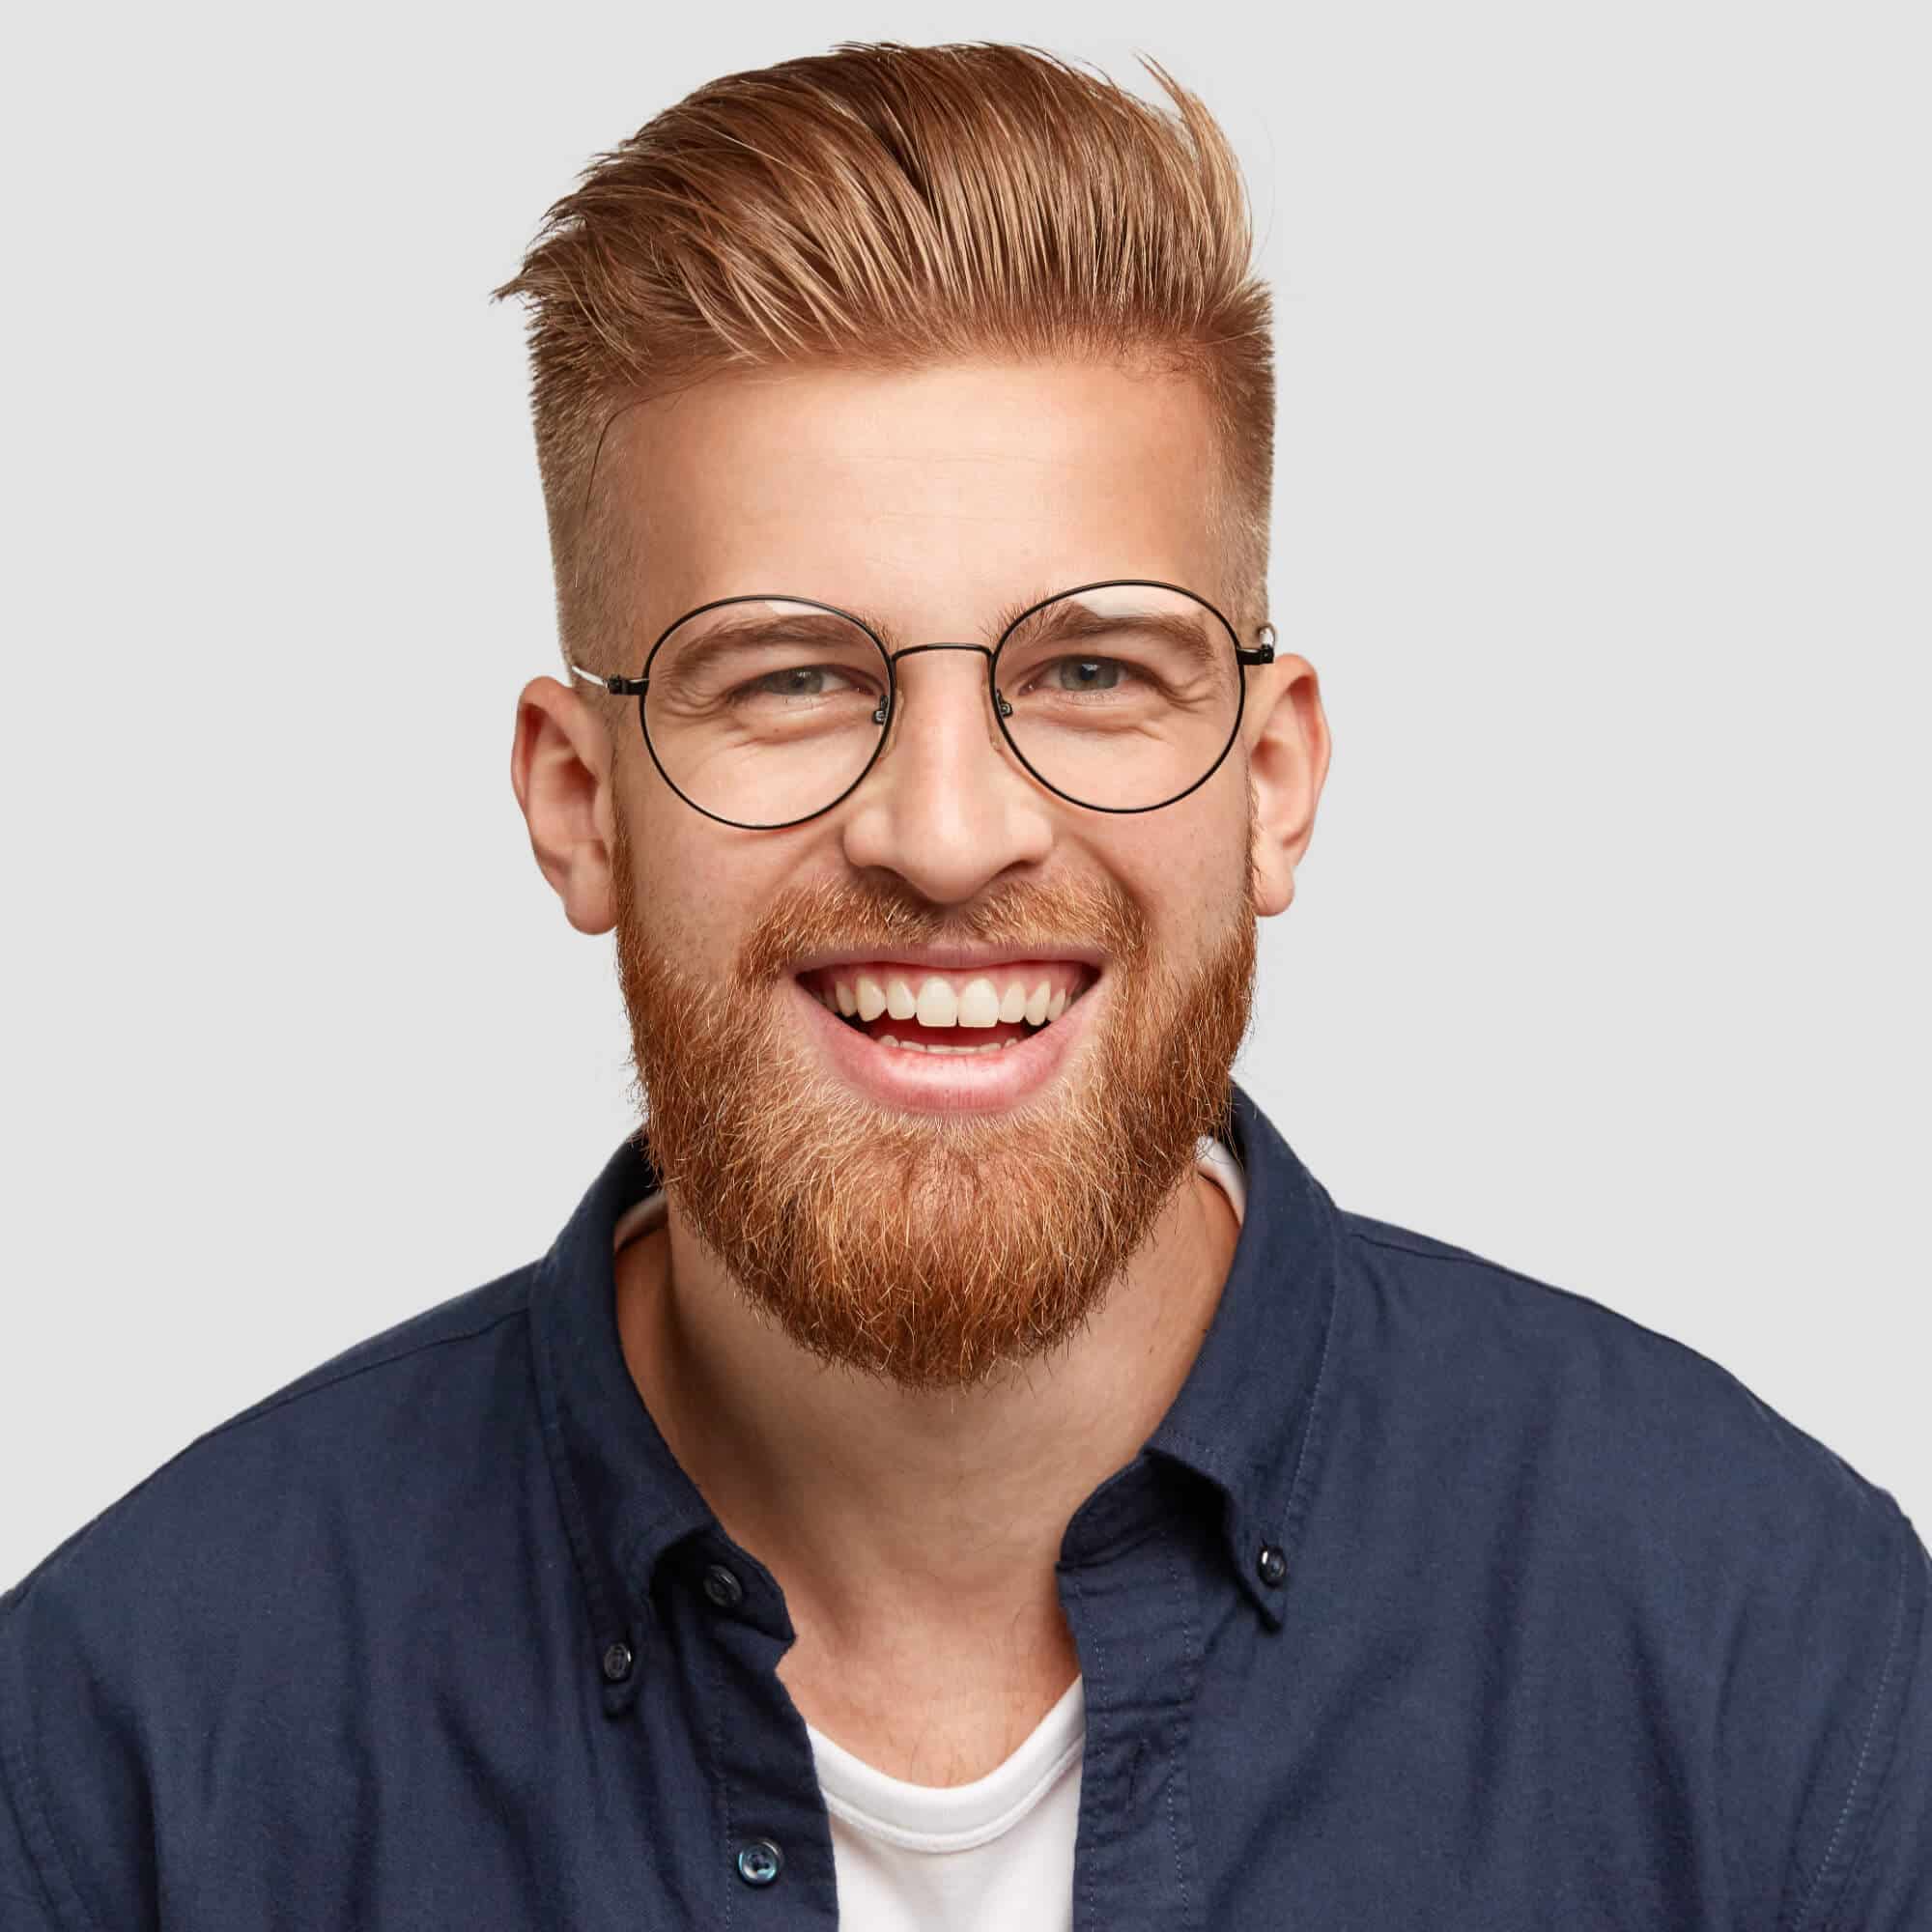 pleased-cheerful-redhaired-male-with-pleasant-smil-2021-08-31-04-23-54-utc-1-1.jpg